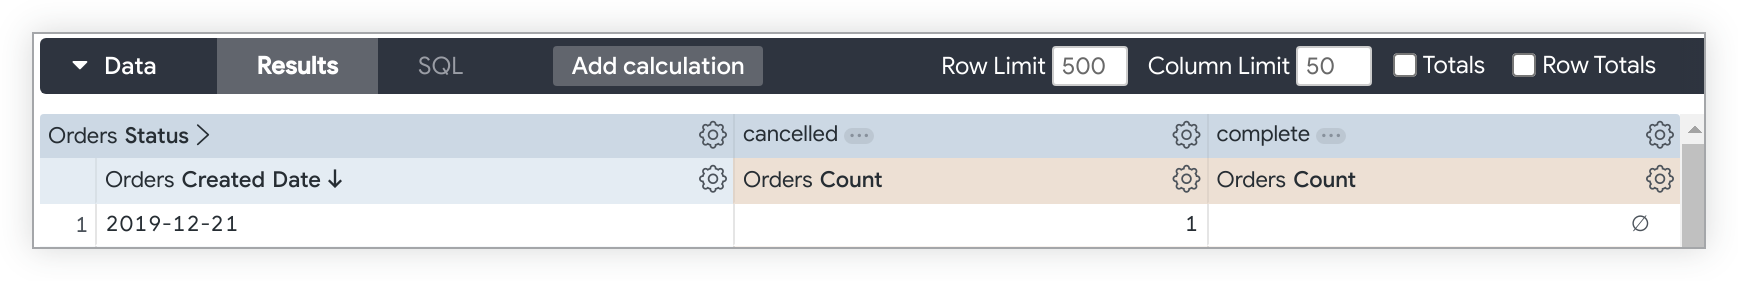 Explore query with Orders Created Date and Orders Count pivoted by the Orders Status field values cancelled and complete.